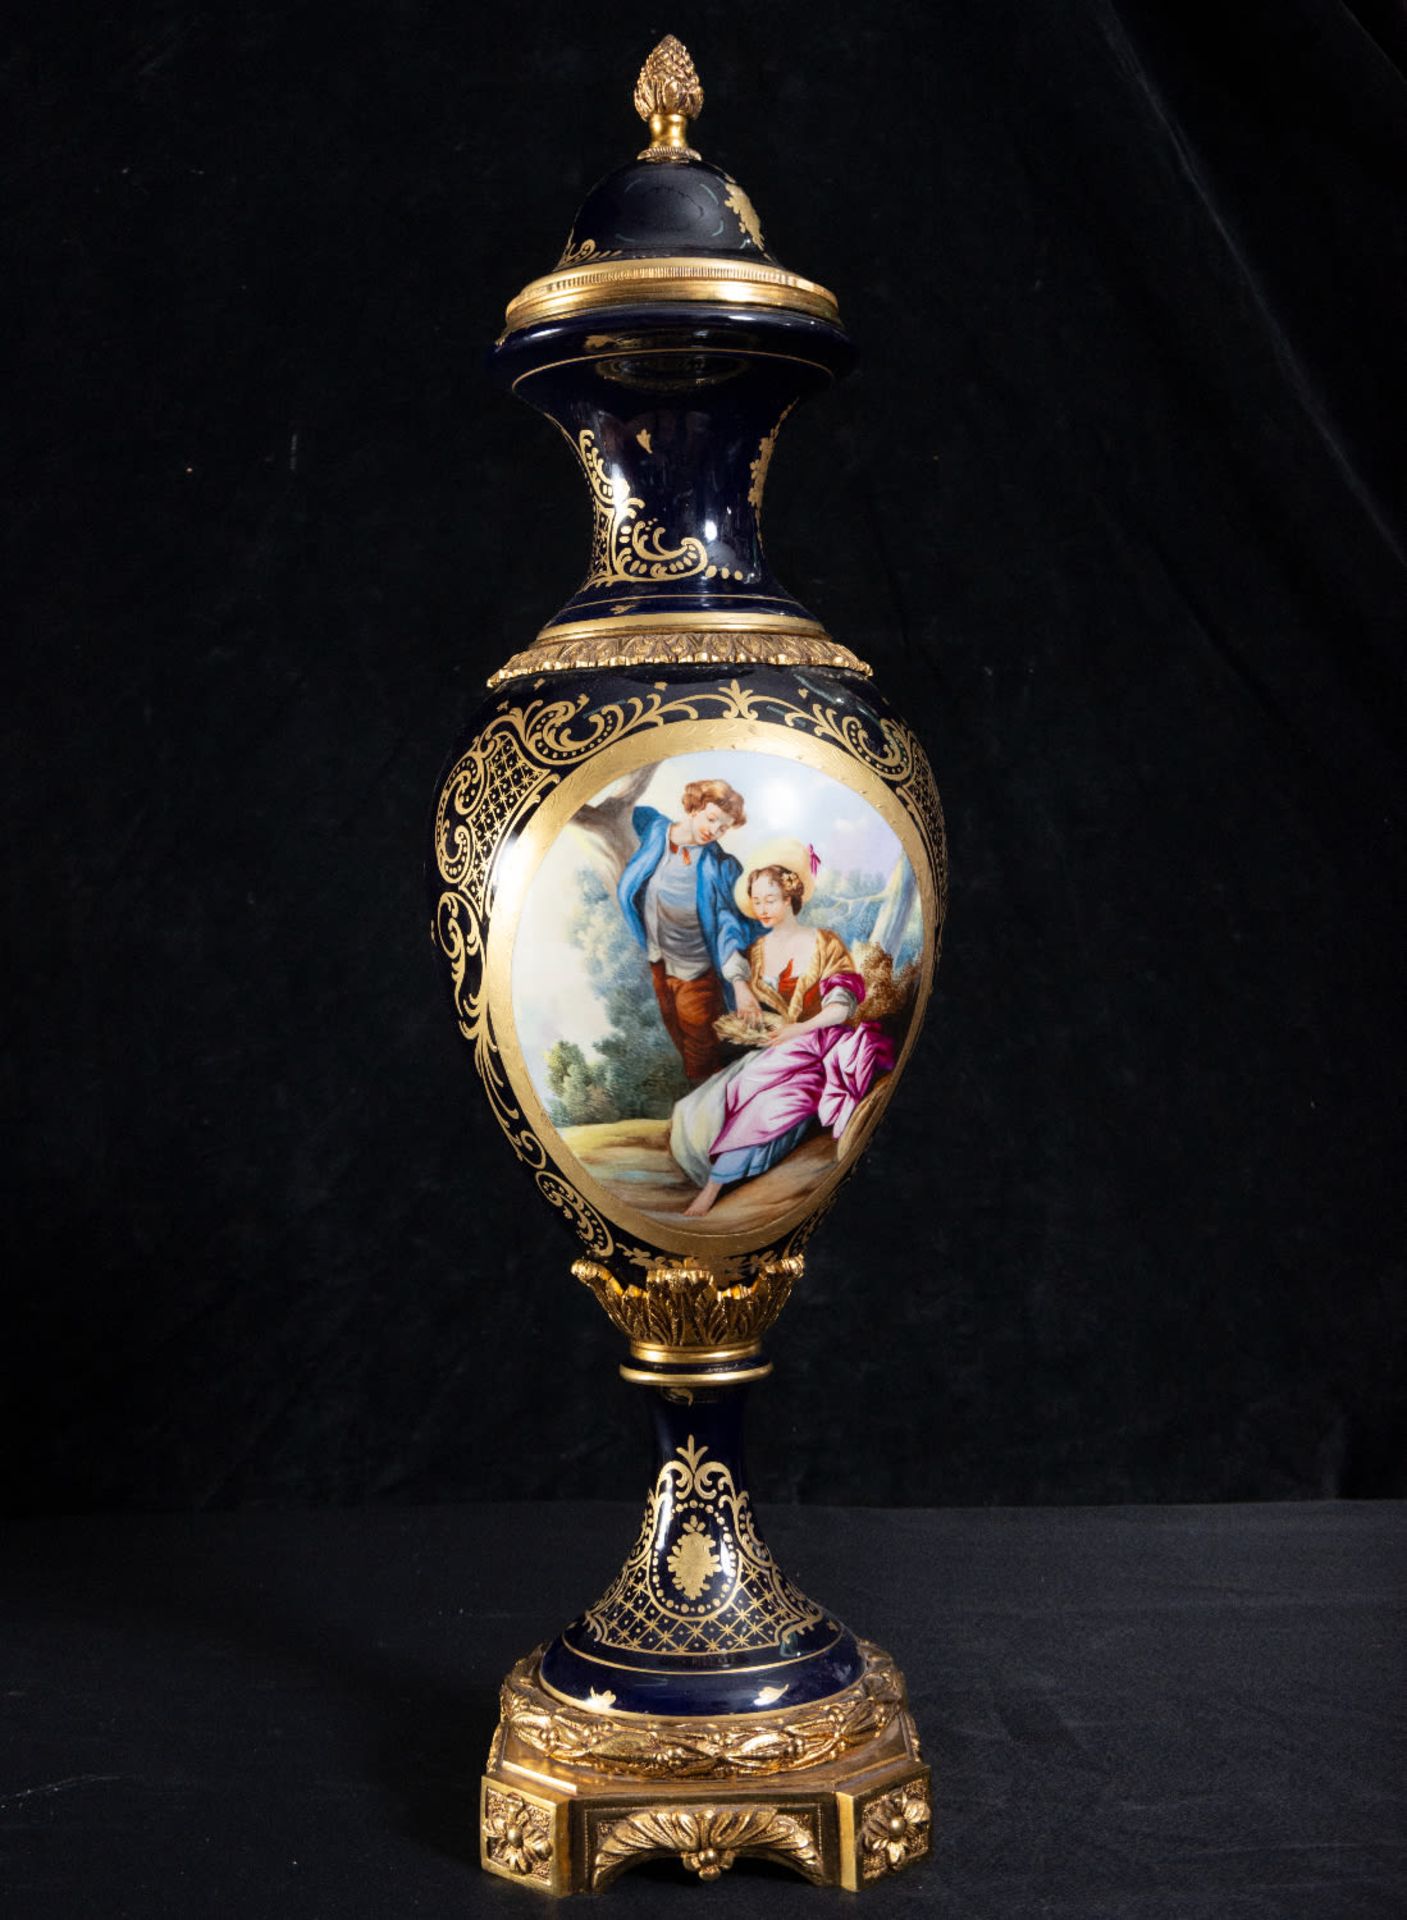 Great pair of French porcelain vases "Sevres Blue", mounted in gilt bronze, late 19th century - Image 2 of 6